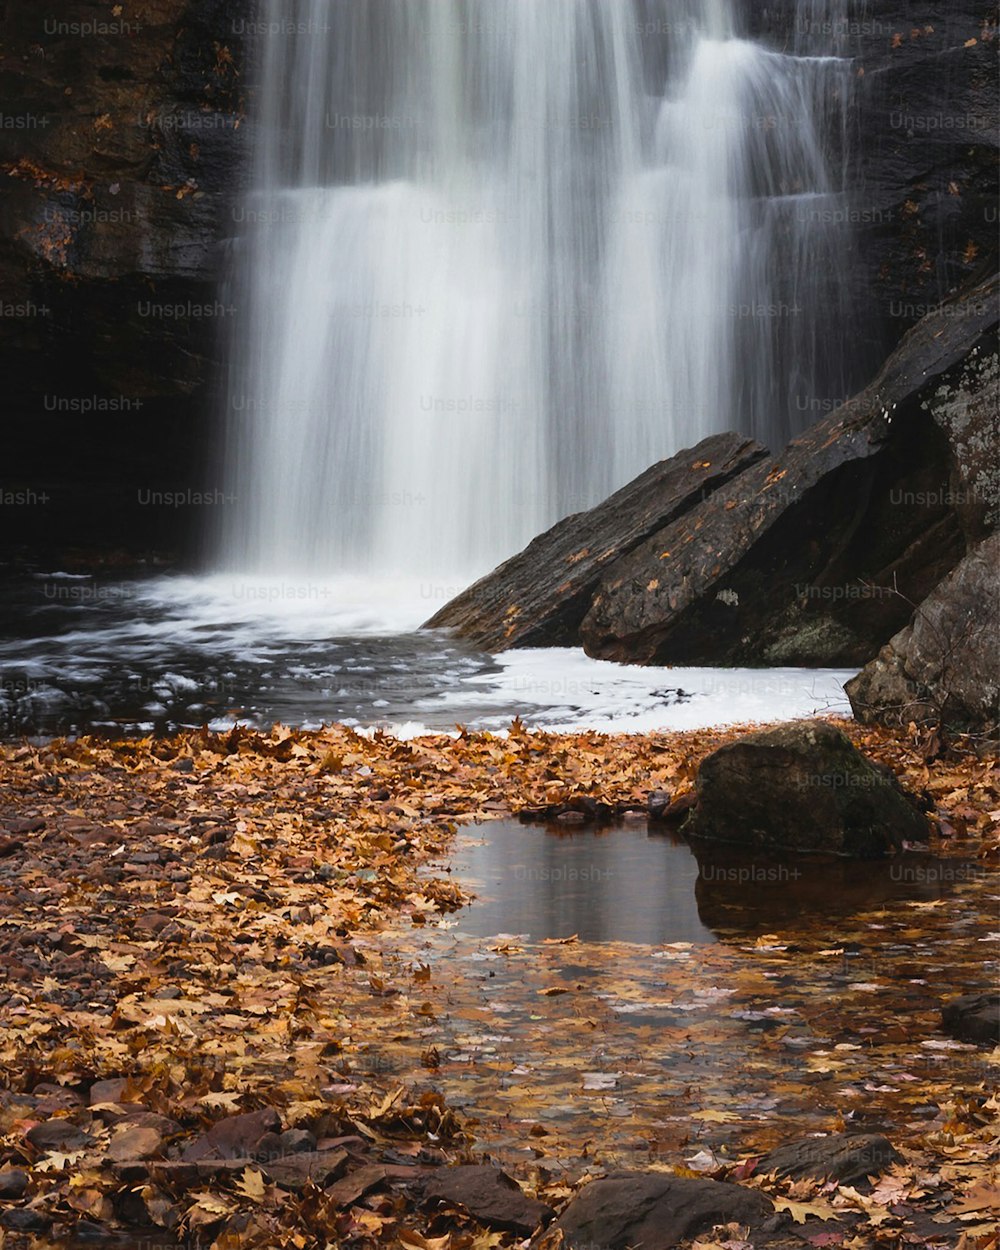 a waterfall with water cascading over rocks and fallen leaves